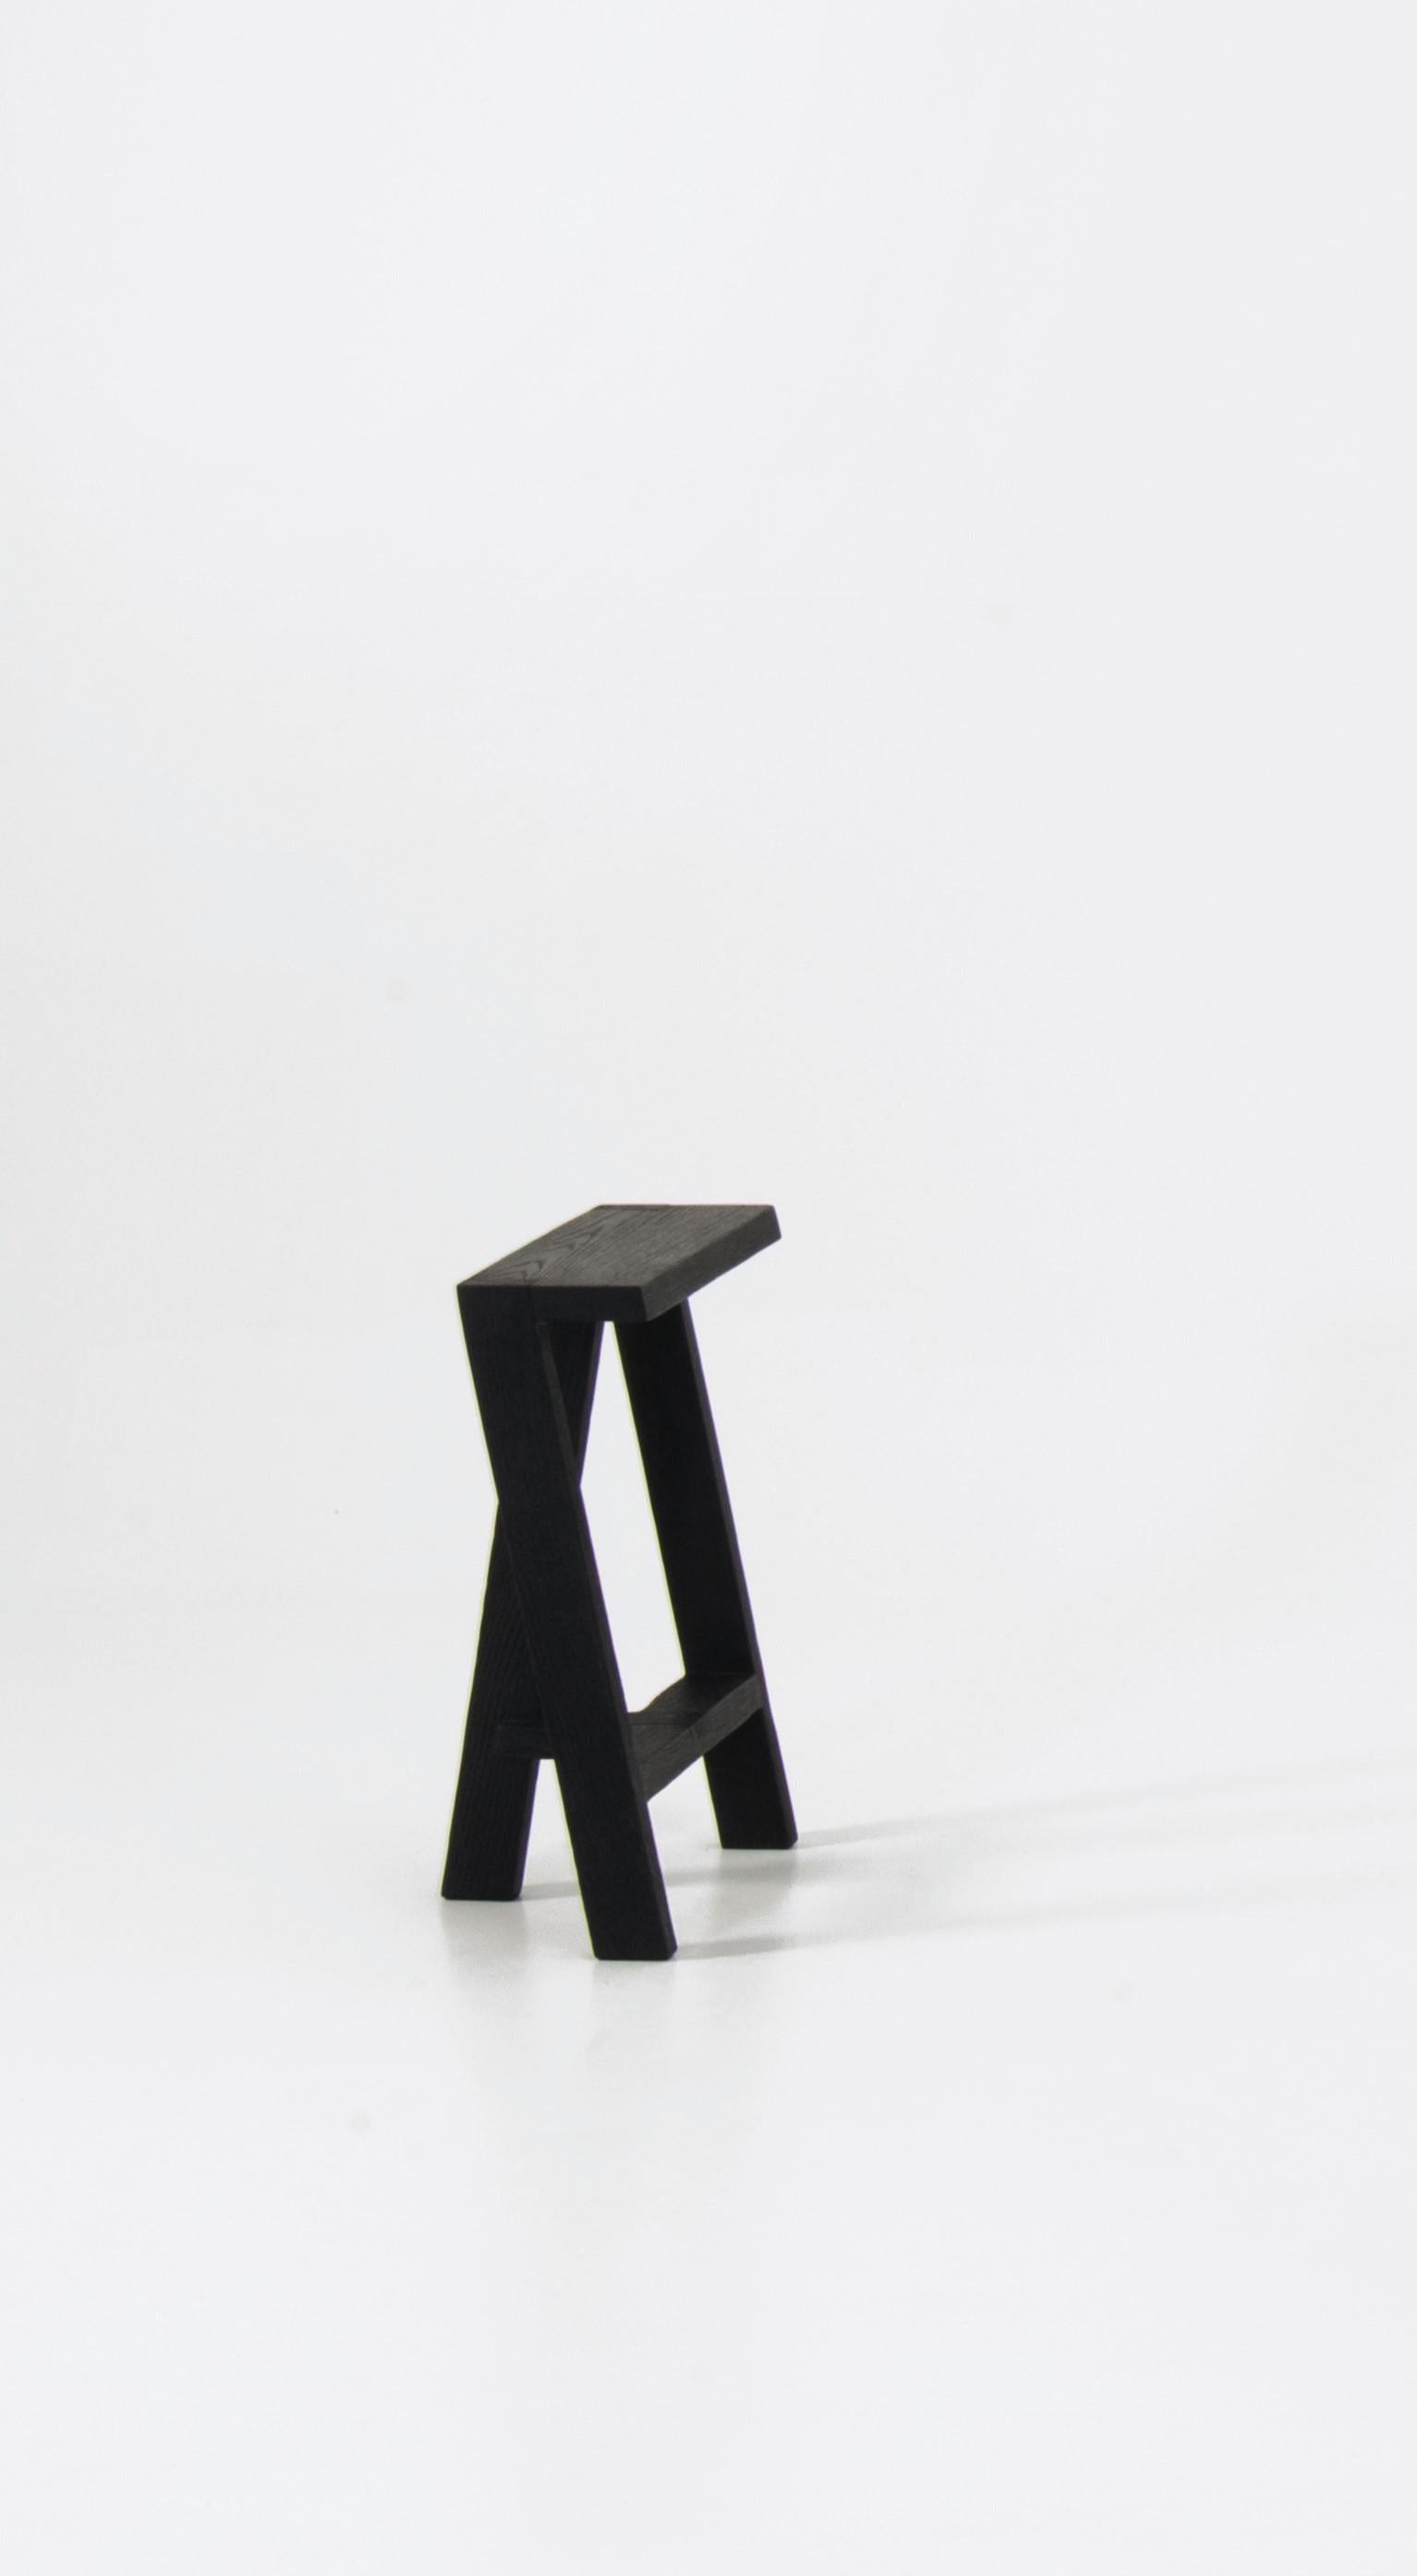 Small Pausa oak stool by Pierre-Emmanuel Vandeputte
Dimensions: D 20 x W 35 x H 45 cm.
Materials: burned oak.
Available in natural oak version and in 3 sizes.

Pausa is a series of stools; 45cm, 65cm, or 80cm of assembled oak pieces. 
The